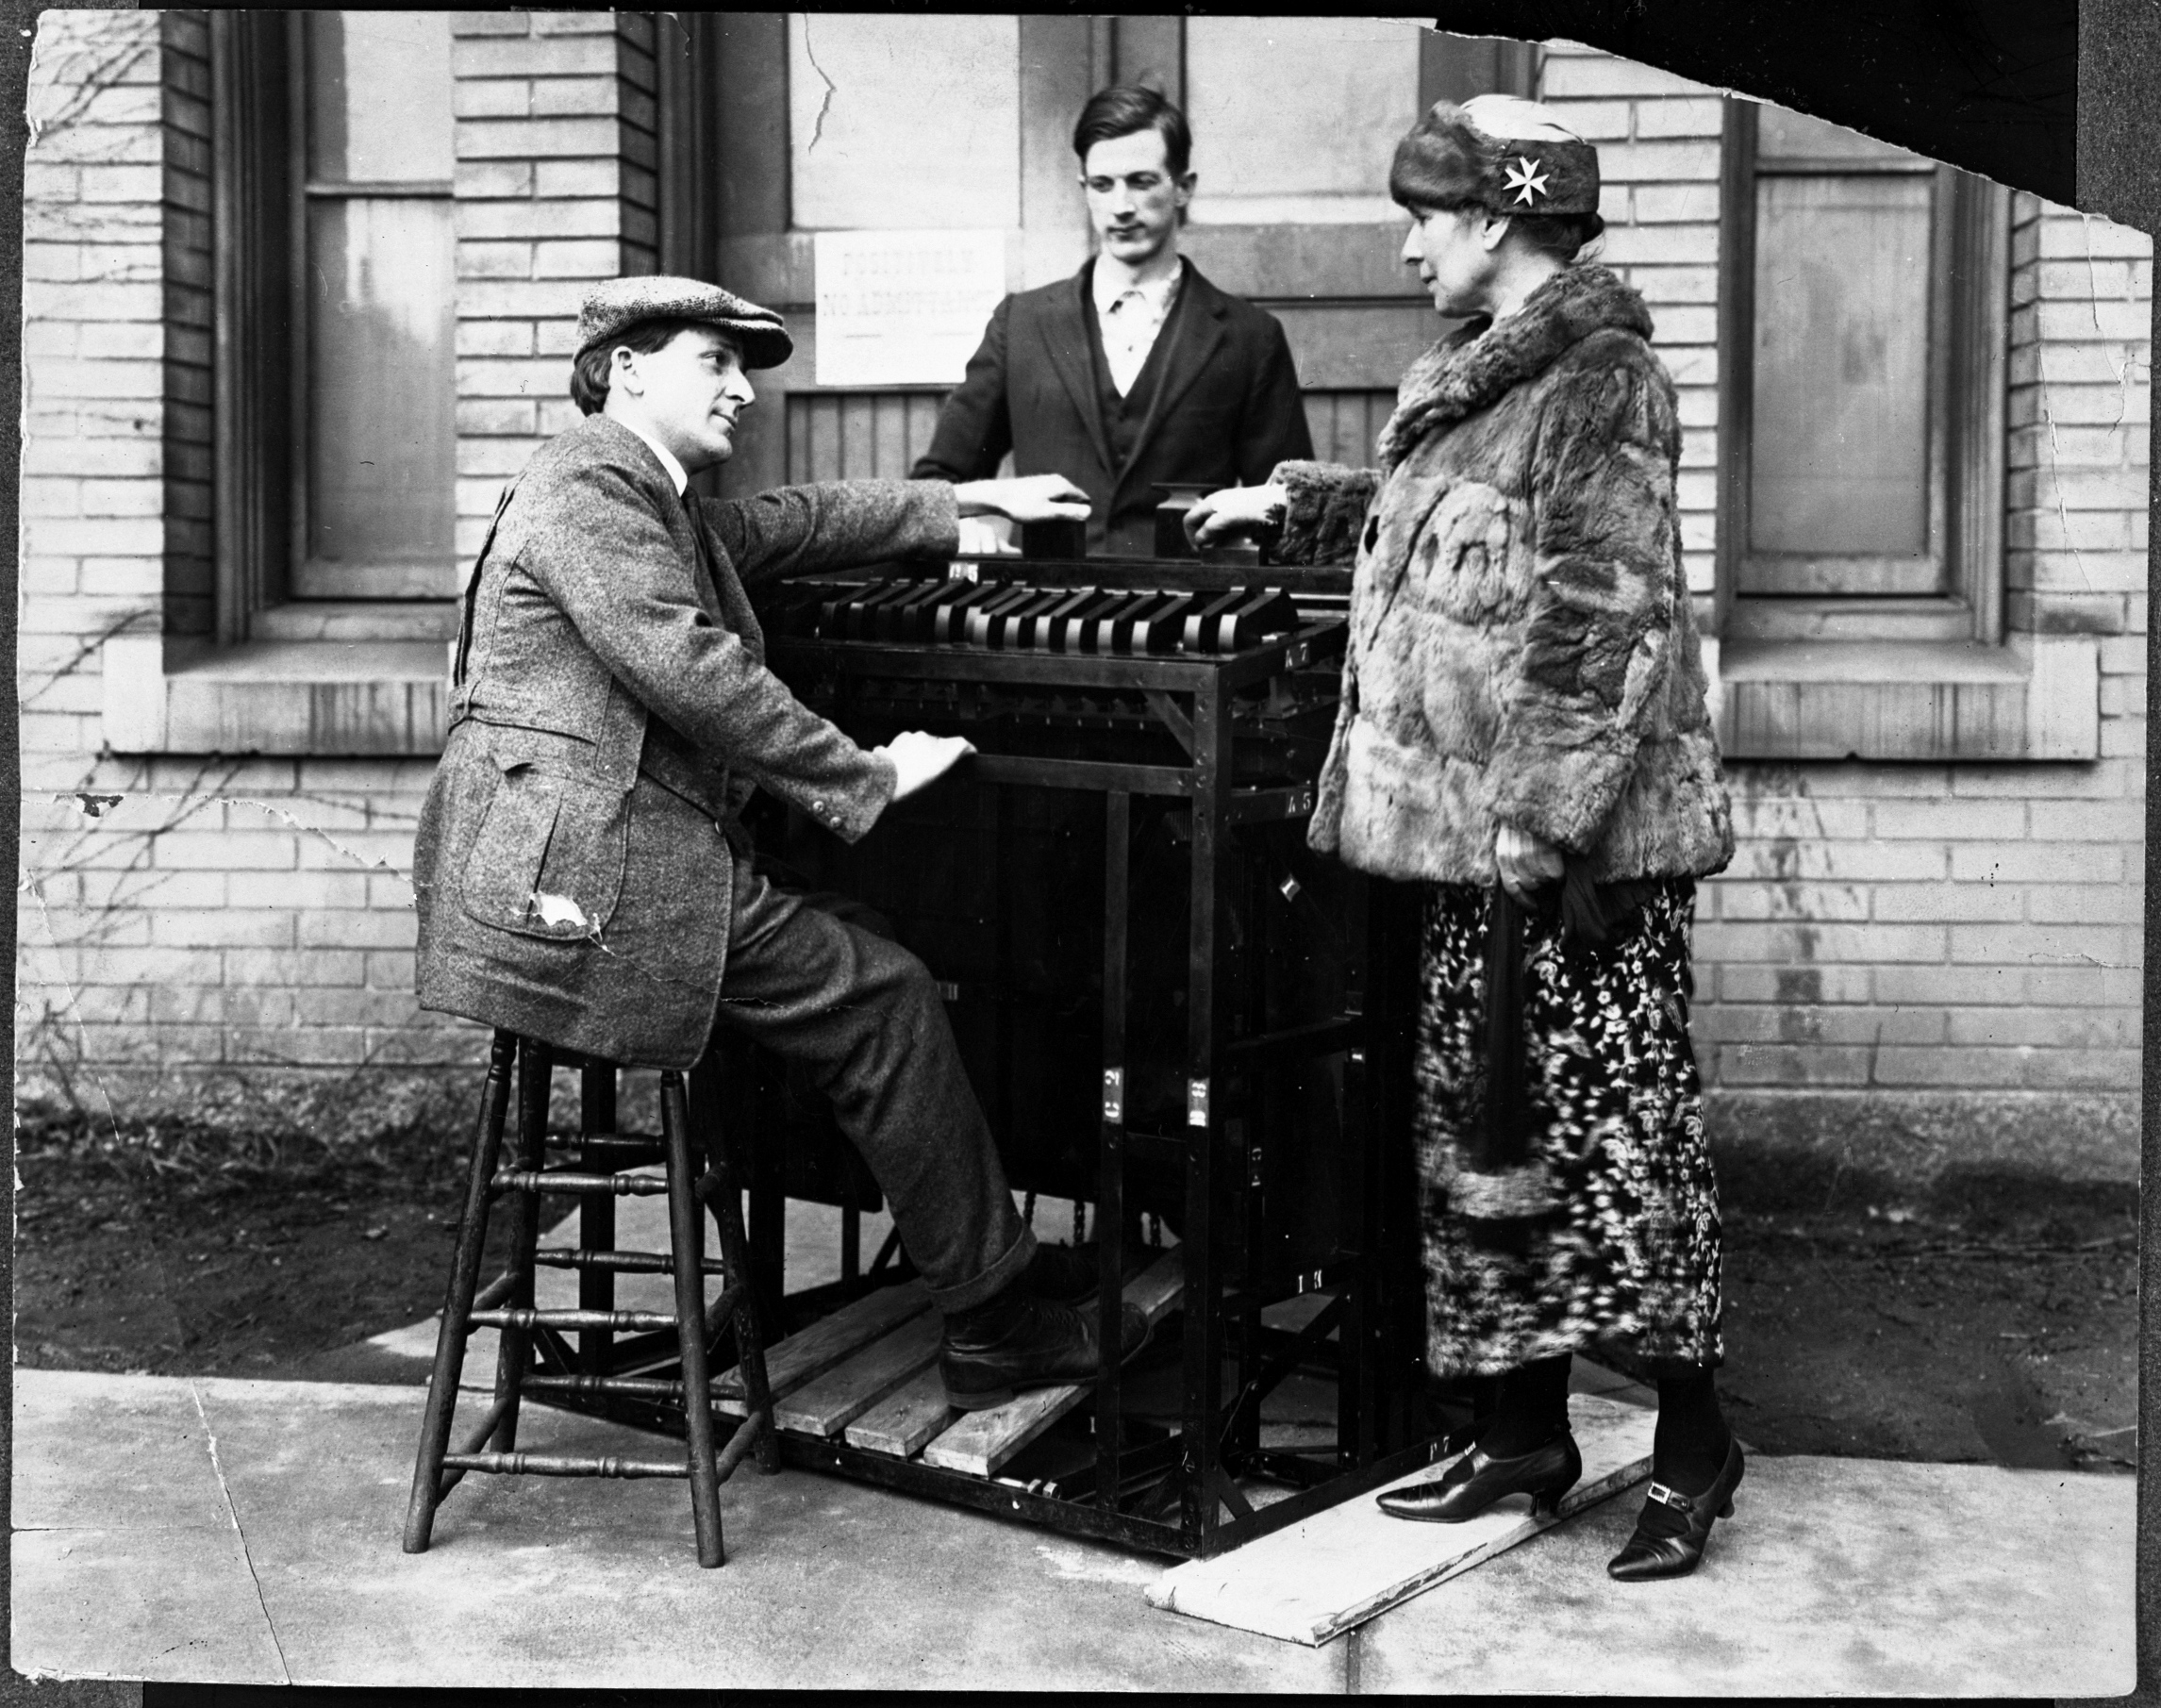 Two men and a woman, arrayed around a 'color organ', which resembles a small, if unusual, piano.